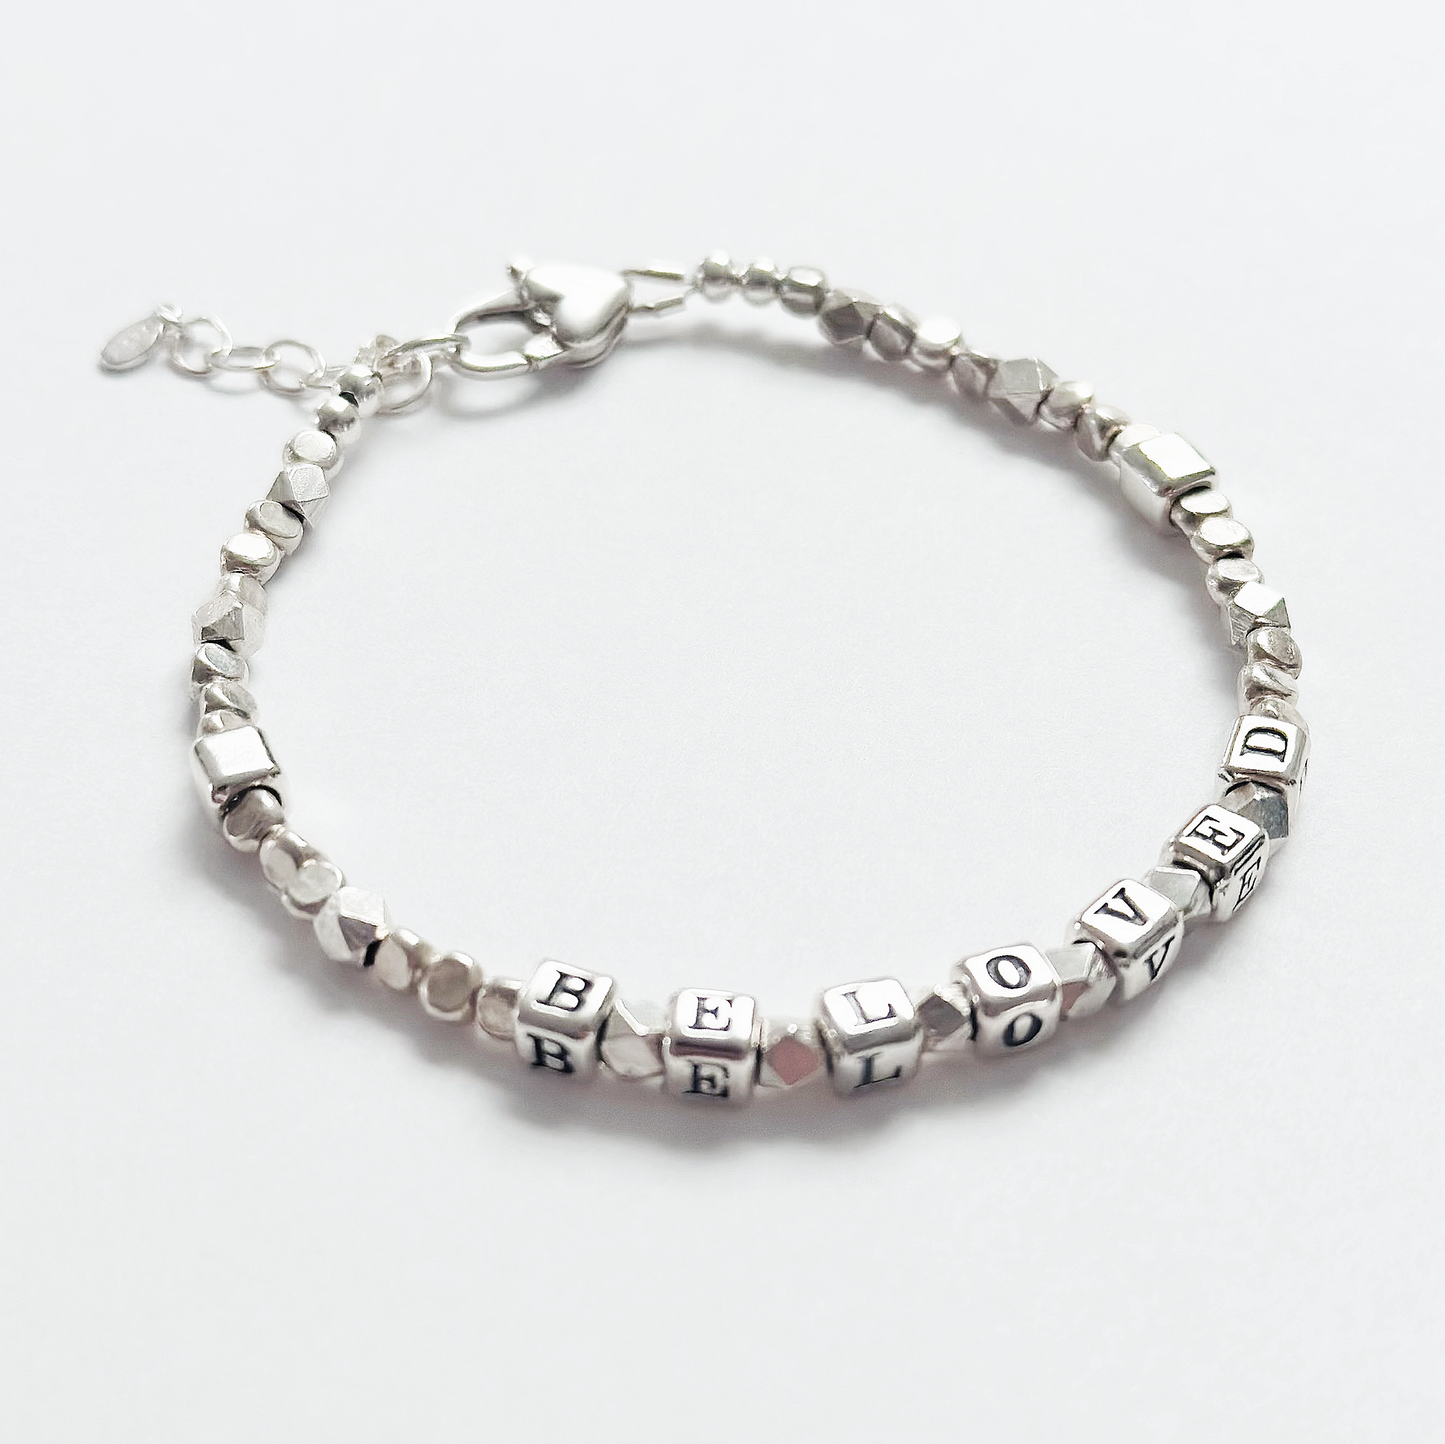 Beloved Love Bracelet in all sterling silver and a heart clasp